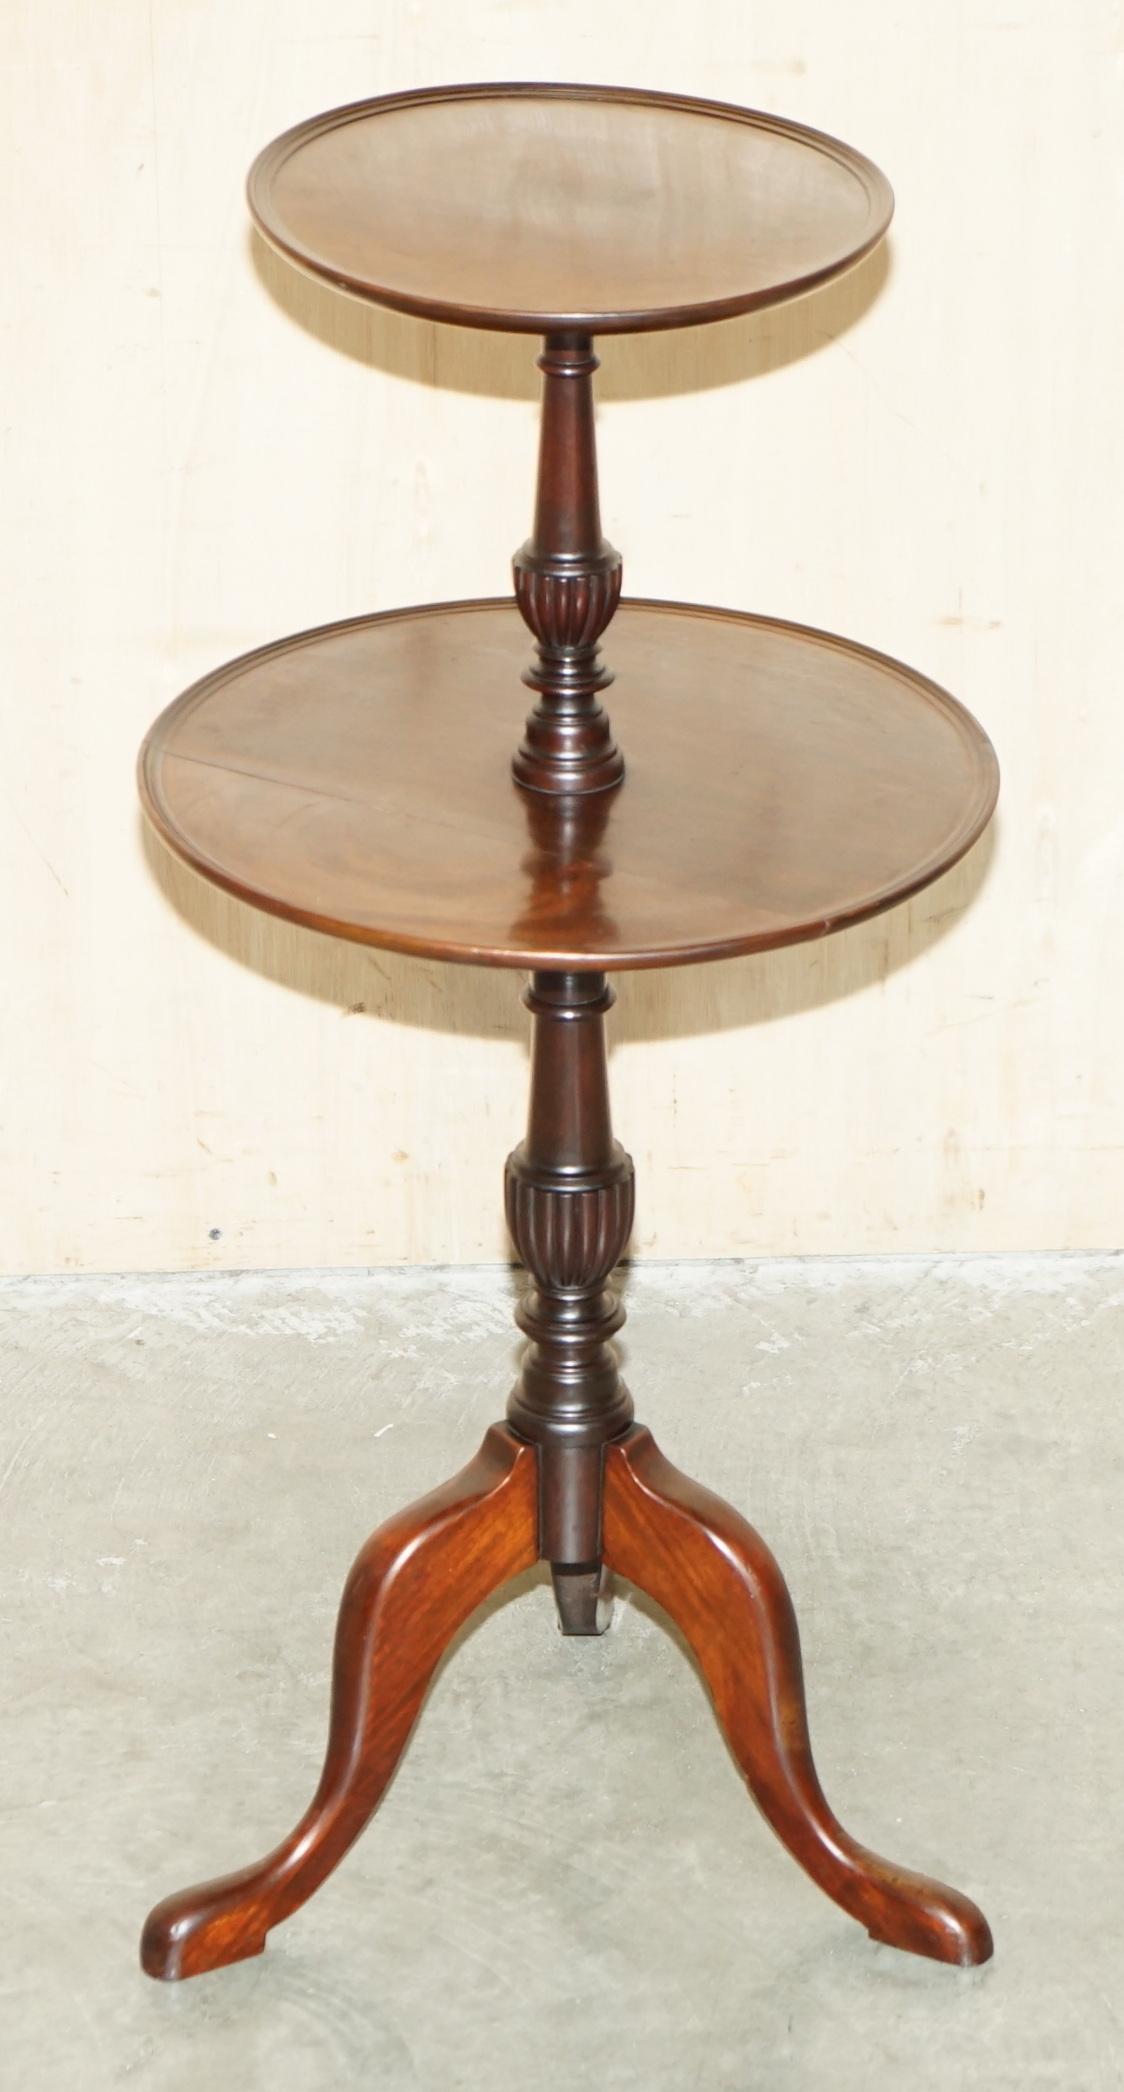 Royal House Antiques

Royal House Antiques is delighted to offer for sale this lovely circa 1920's tall two tiered tripod table with lazy Susan style rotating middle bottom shelf

Please note the delivery fee listed is just a guide, it covers within